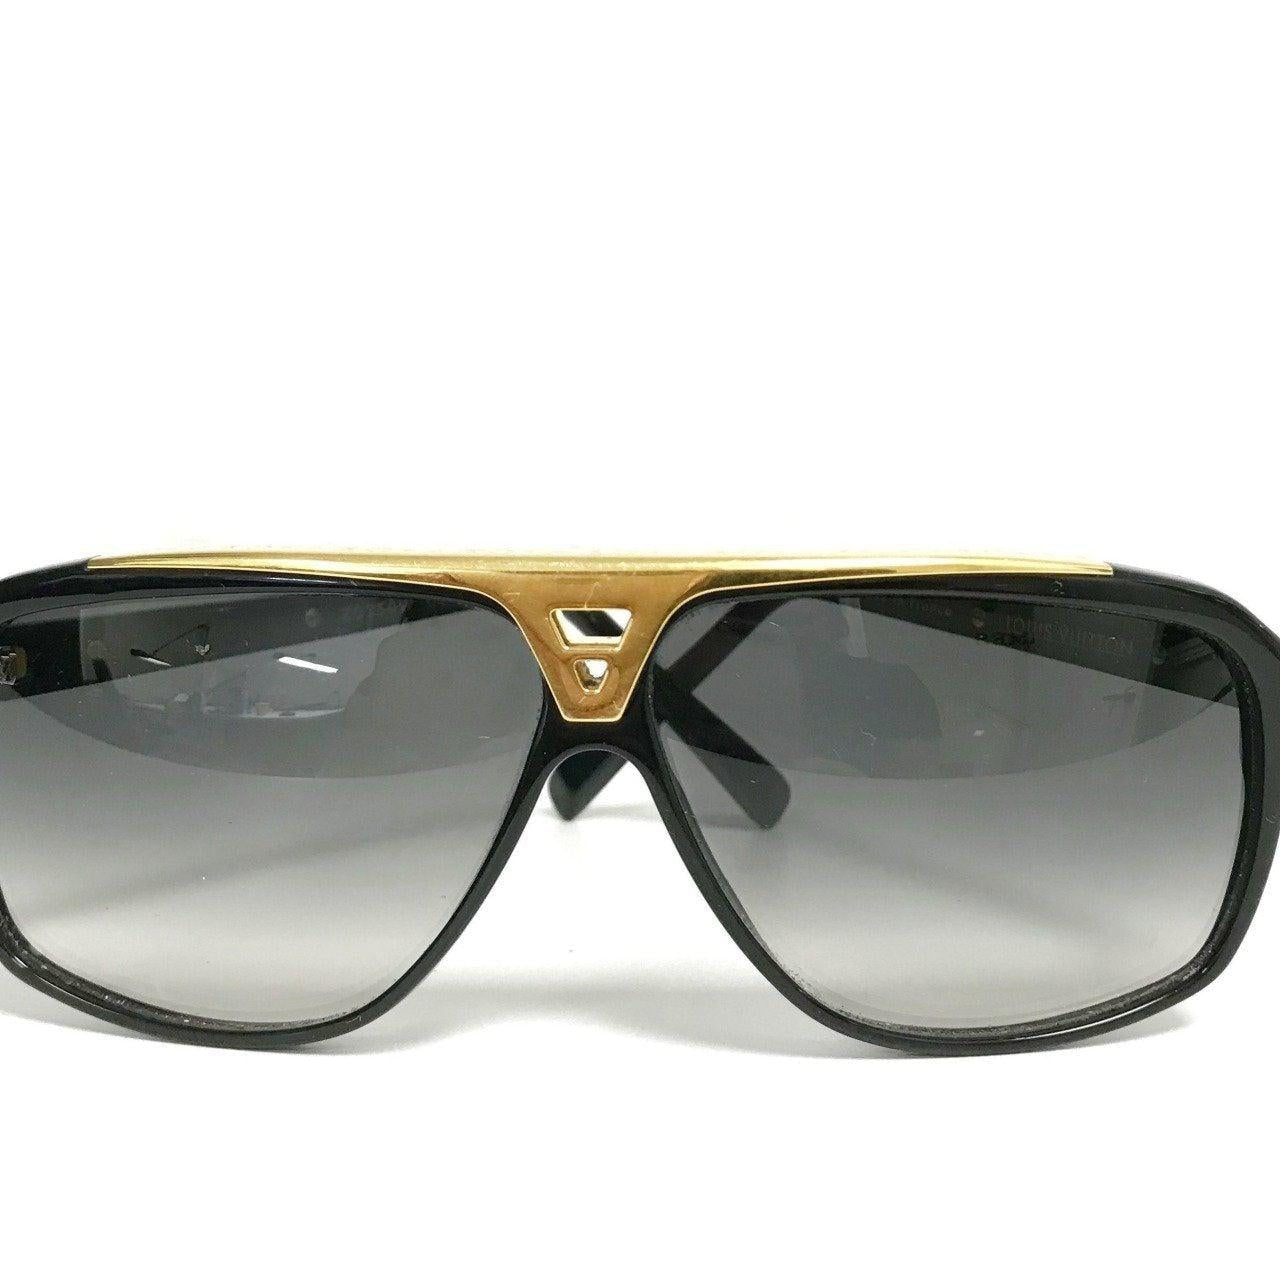 Louis Vuitton Evidence Sunglasses Our Price: $460 CAD / $380 USD